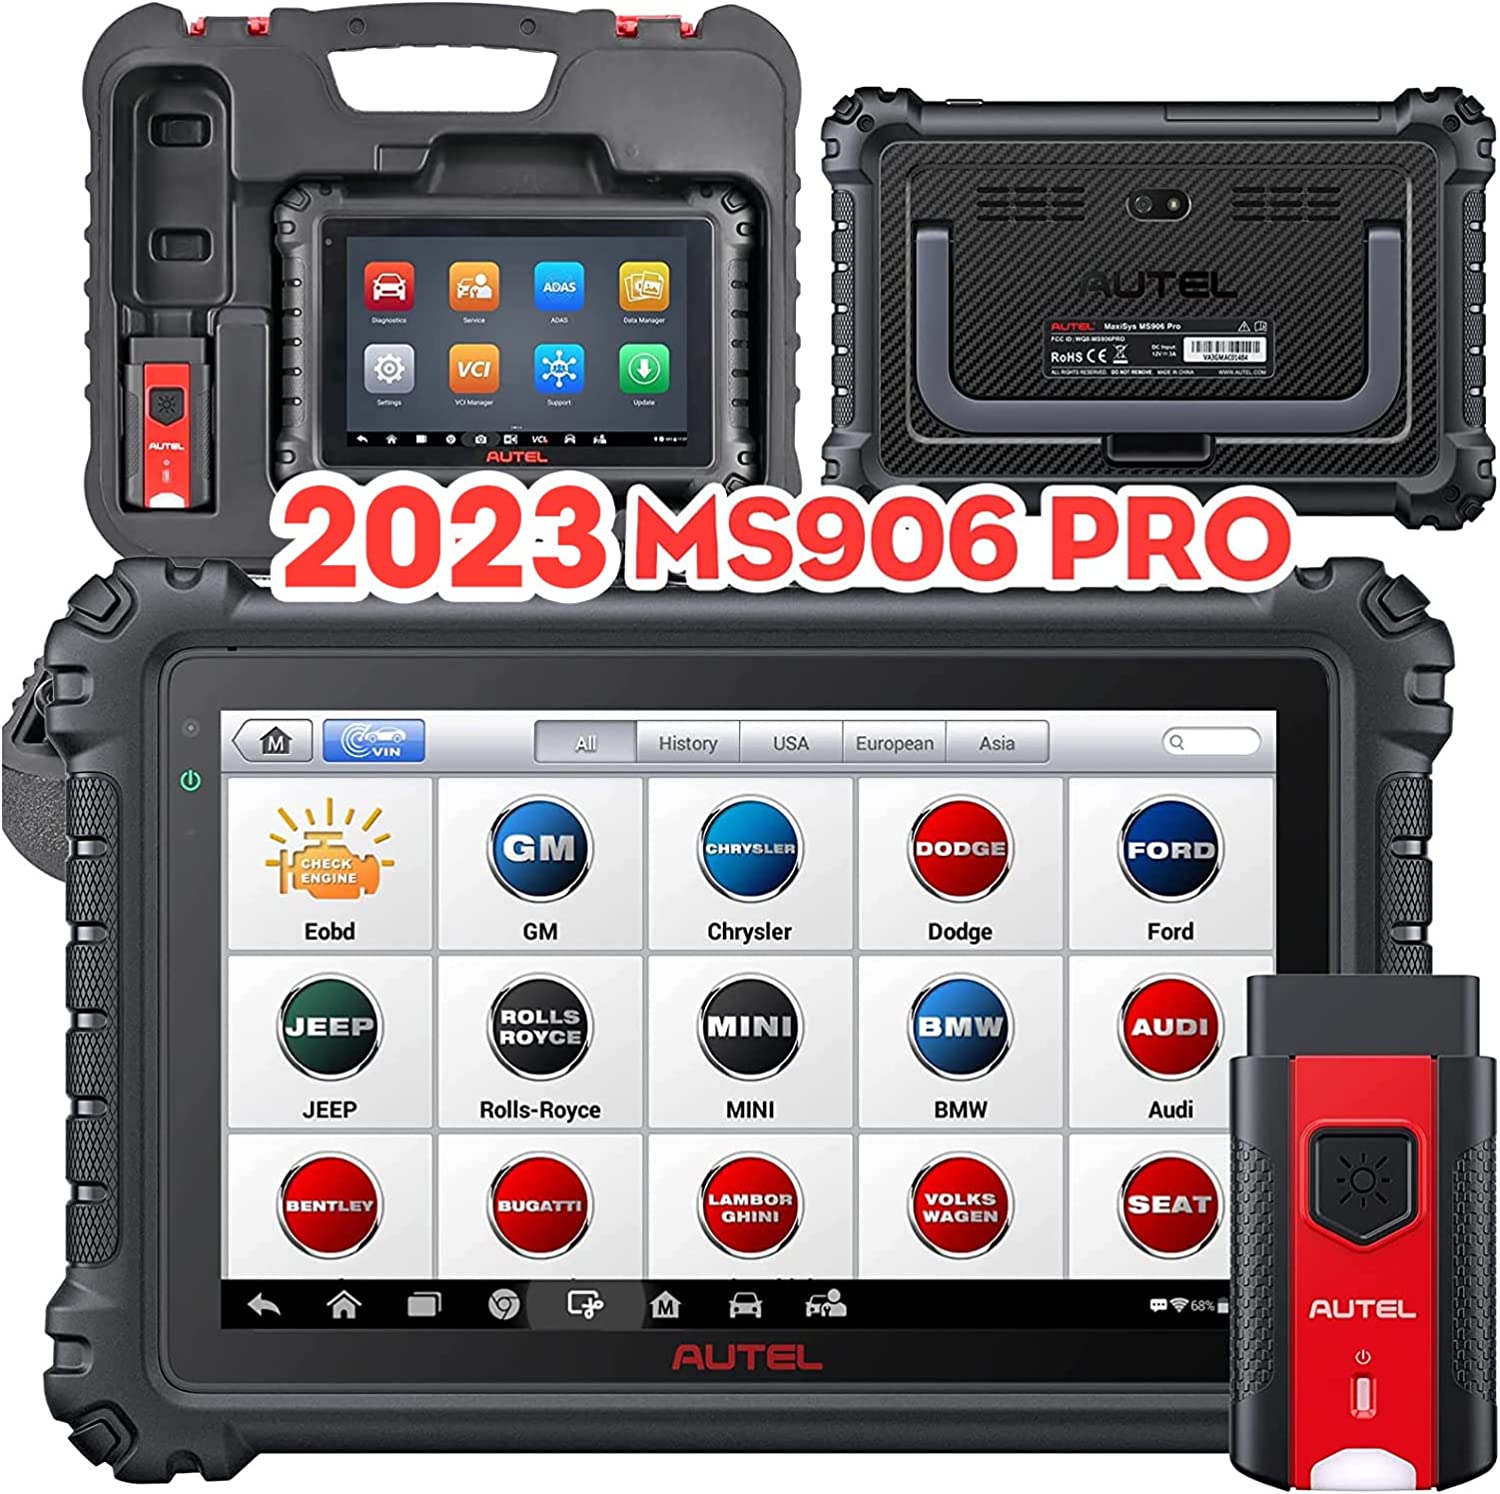 Autel Scanner MaxiSYS MS906 Pro Car Diagnostic Scan Tool Bi-Directional,  All-System Diagnosis ECU Coding, 36+ Service, Upgrade of MS906BT/MK906BT/ MS906TS/MS908